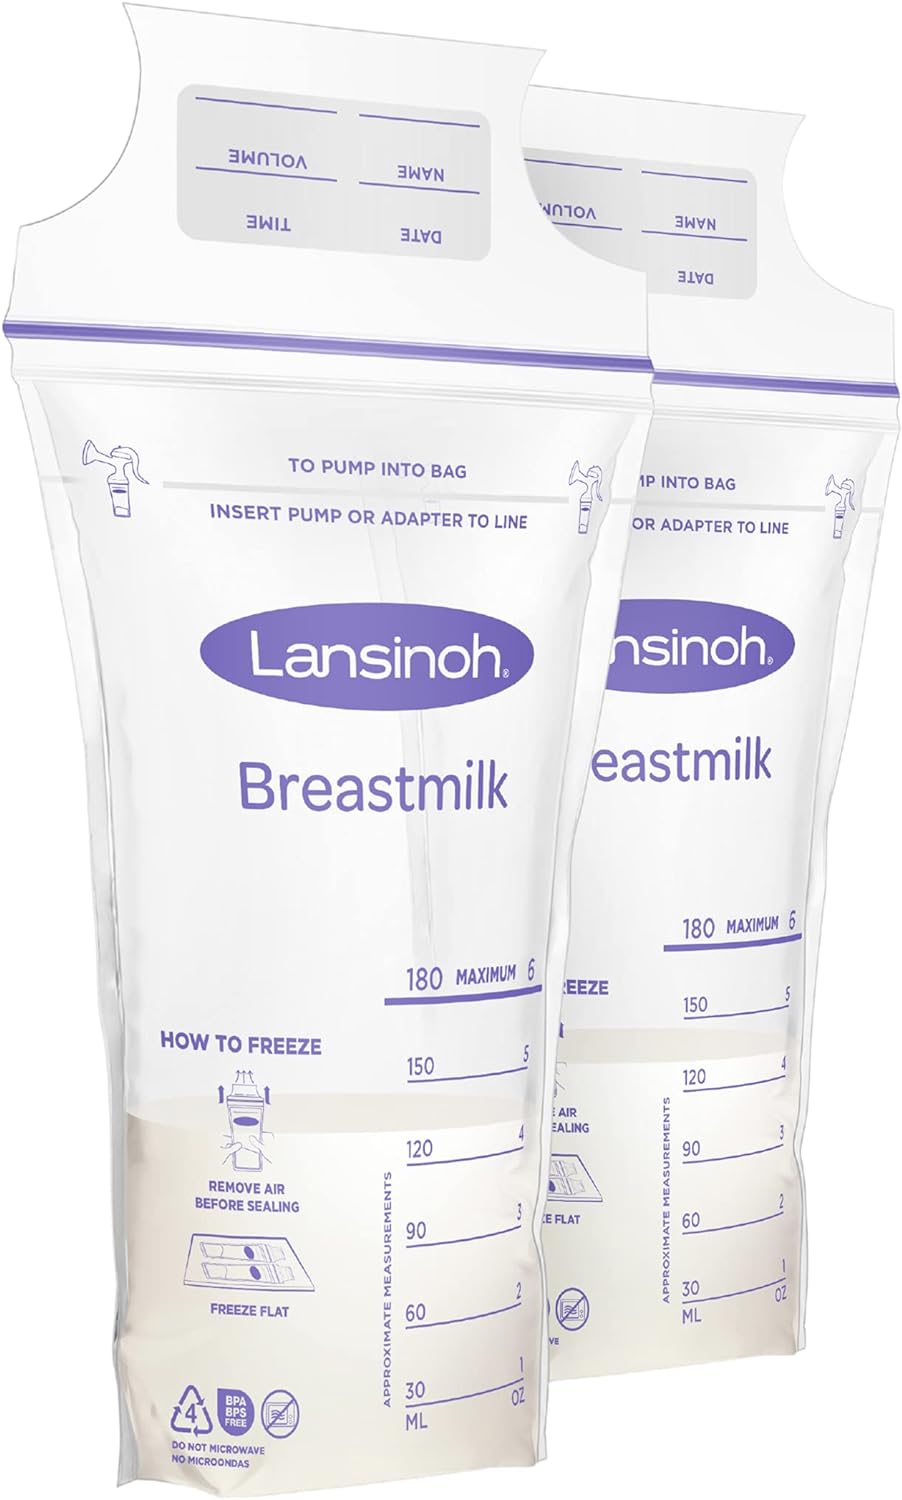 Lansinoh Breastmilk Storage Bags, 100 Count, 6 Ounce, Easy to Use Milk Storage Bags for Breastfeeding, Presterilized, Hygienically Doubled-Sealed, for Refrigeration and Freezing